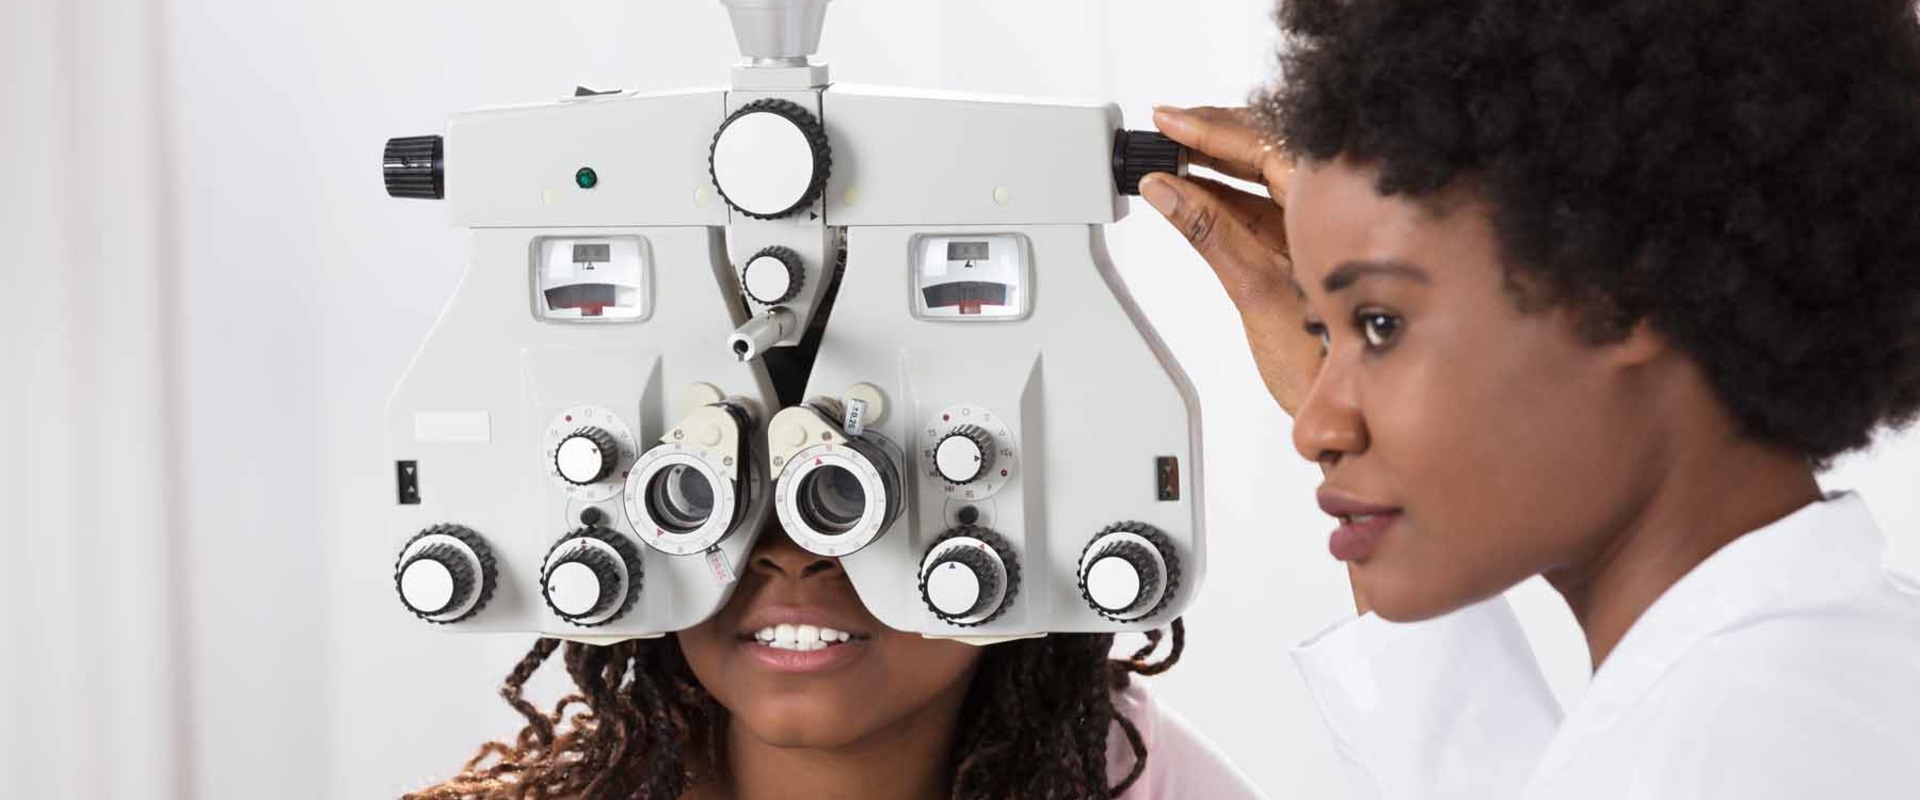 Can an Optometrist Provide Essential Eye Care Services?